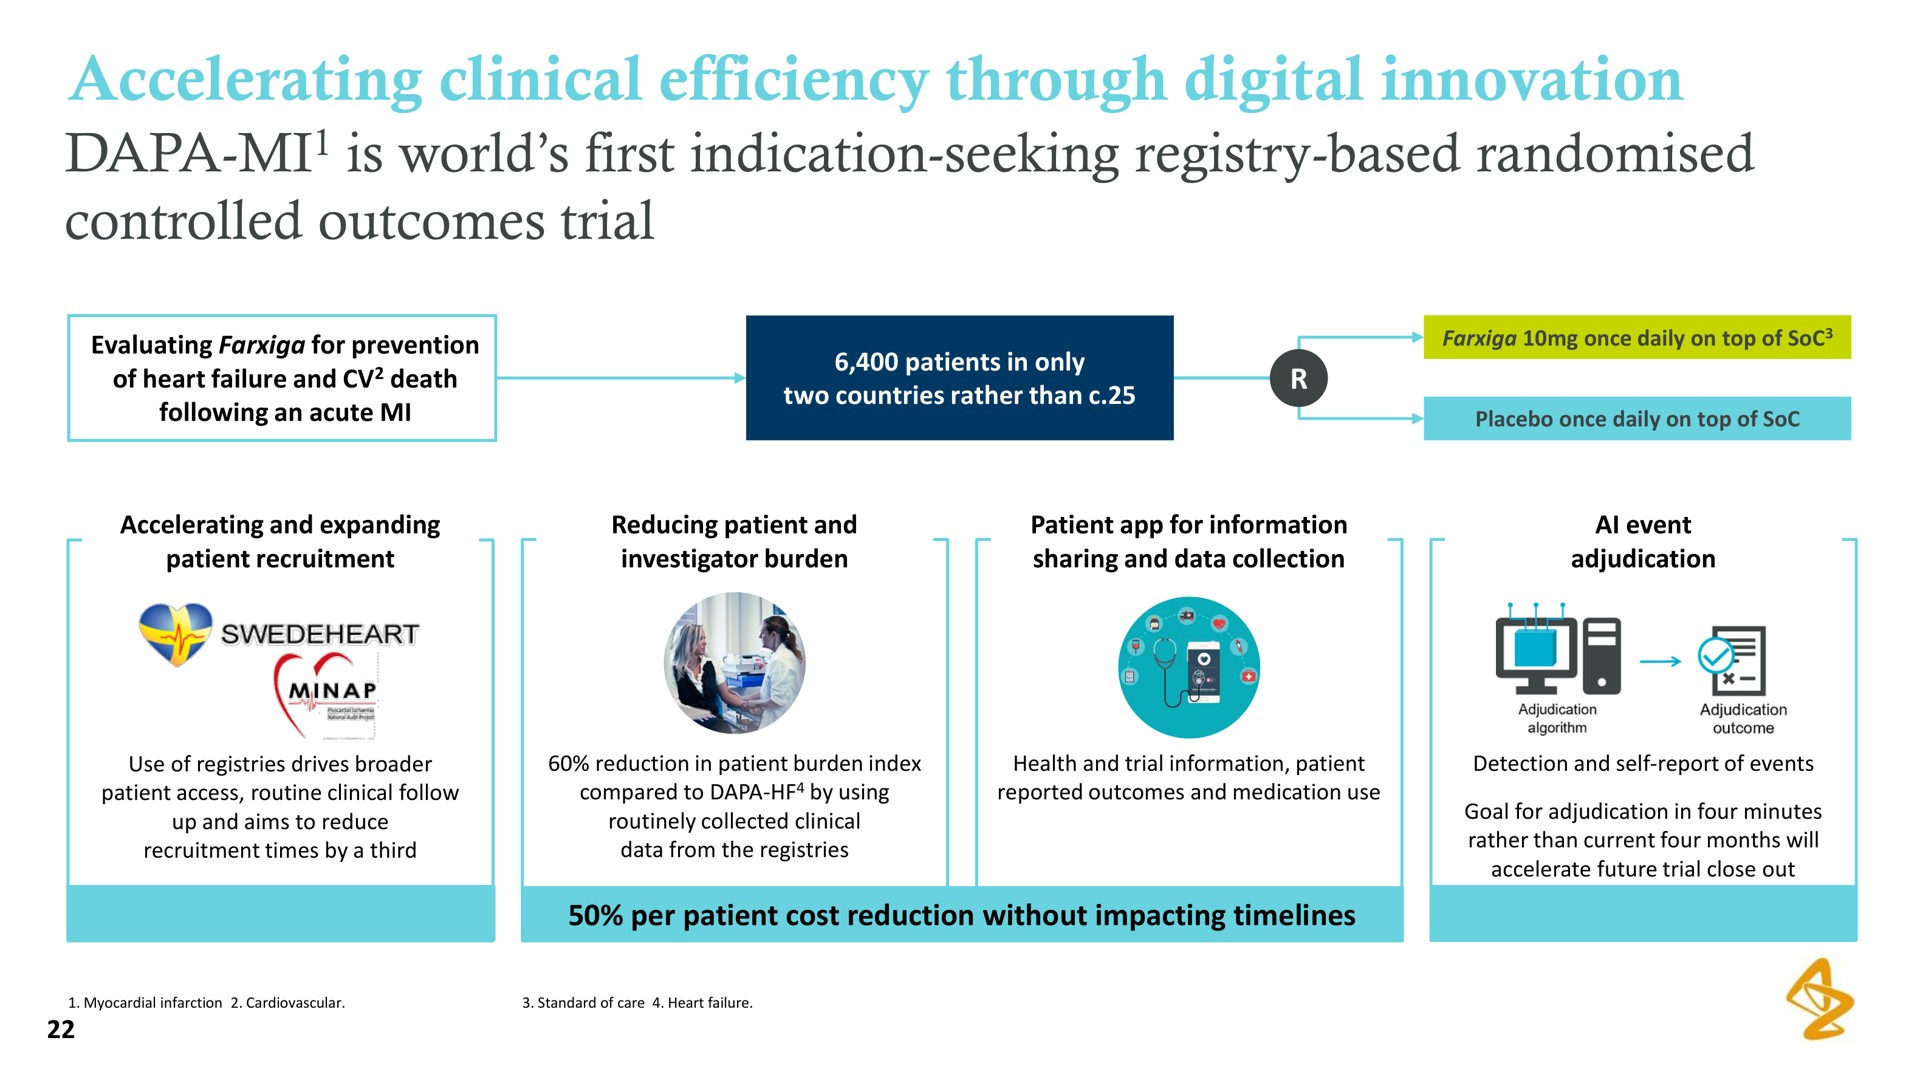 accelerating clinical efficiency through digital innovation is world first indication seeking registry based controlled outcomes trial | AstraZeneca